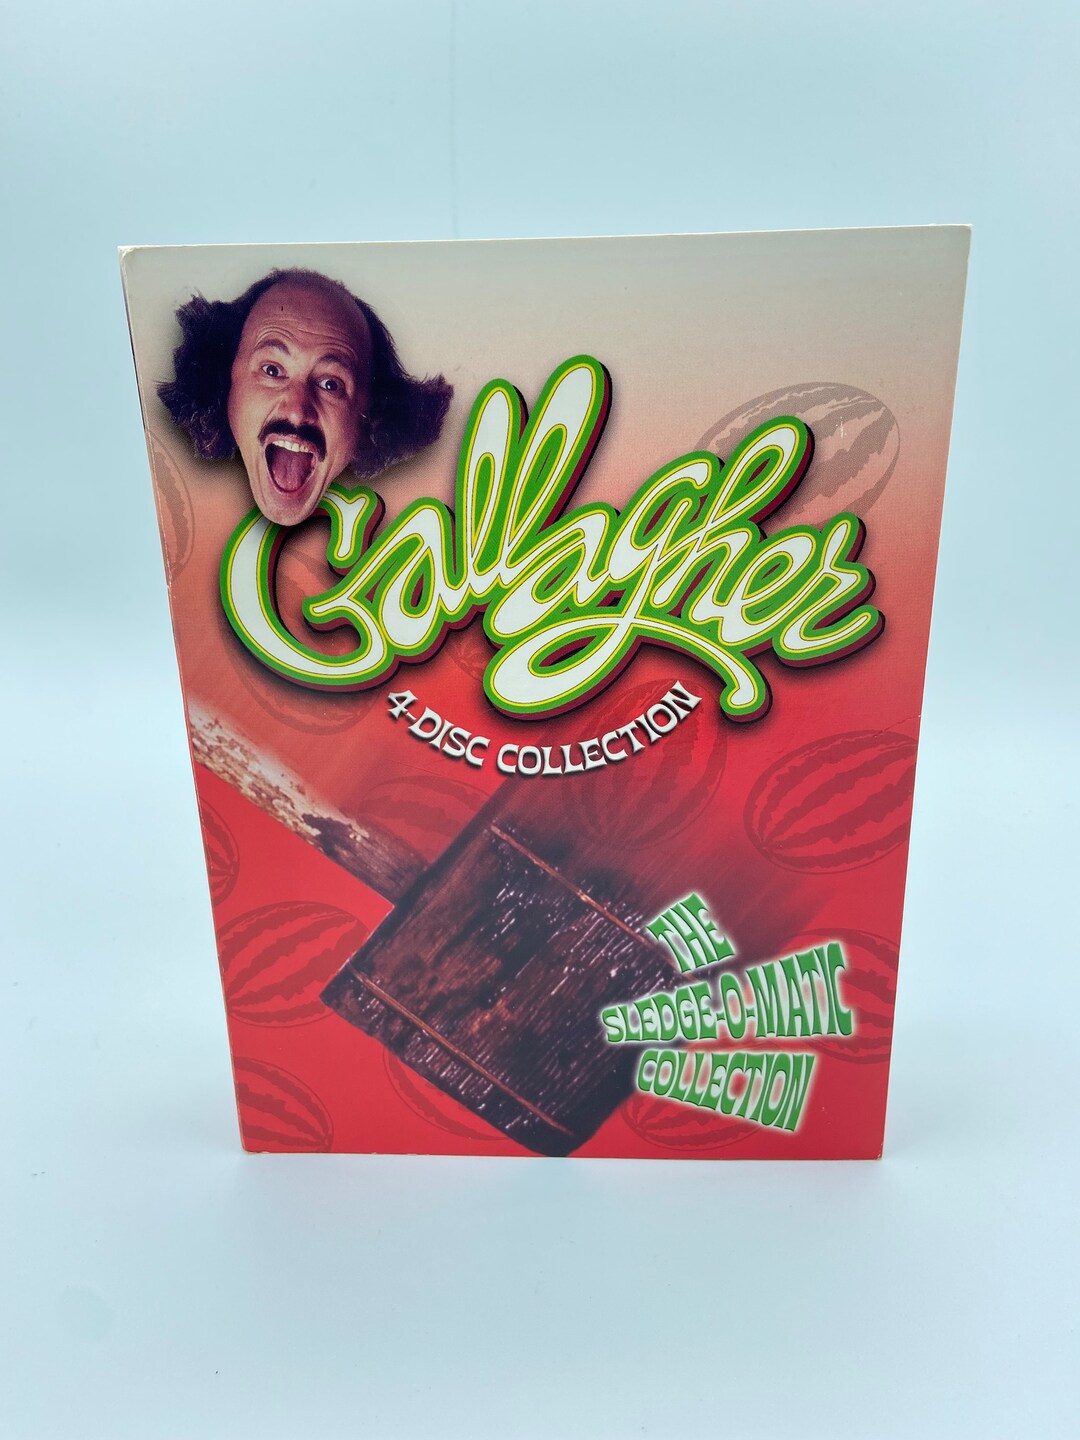 Gallagher Sledge-o-matic DVD Collection. Gallagher - Etsy